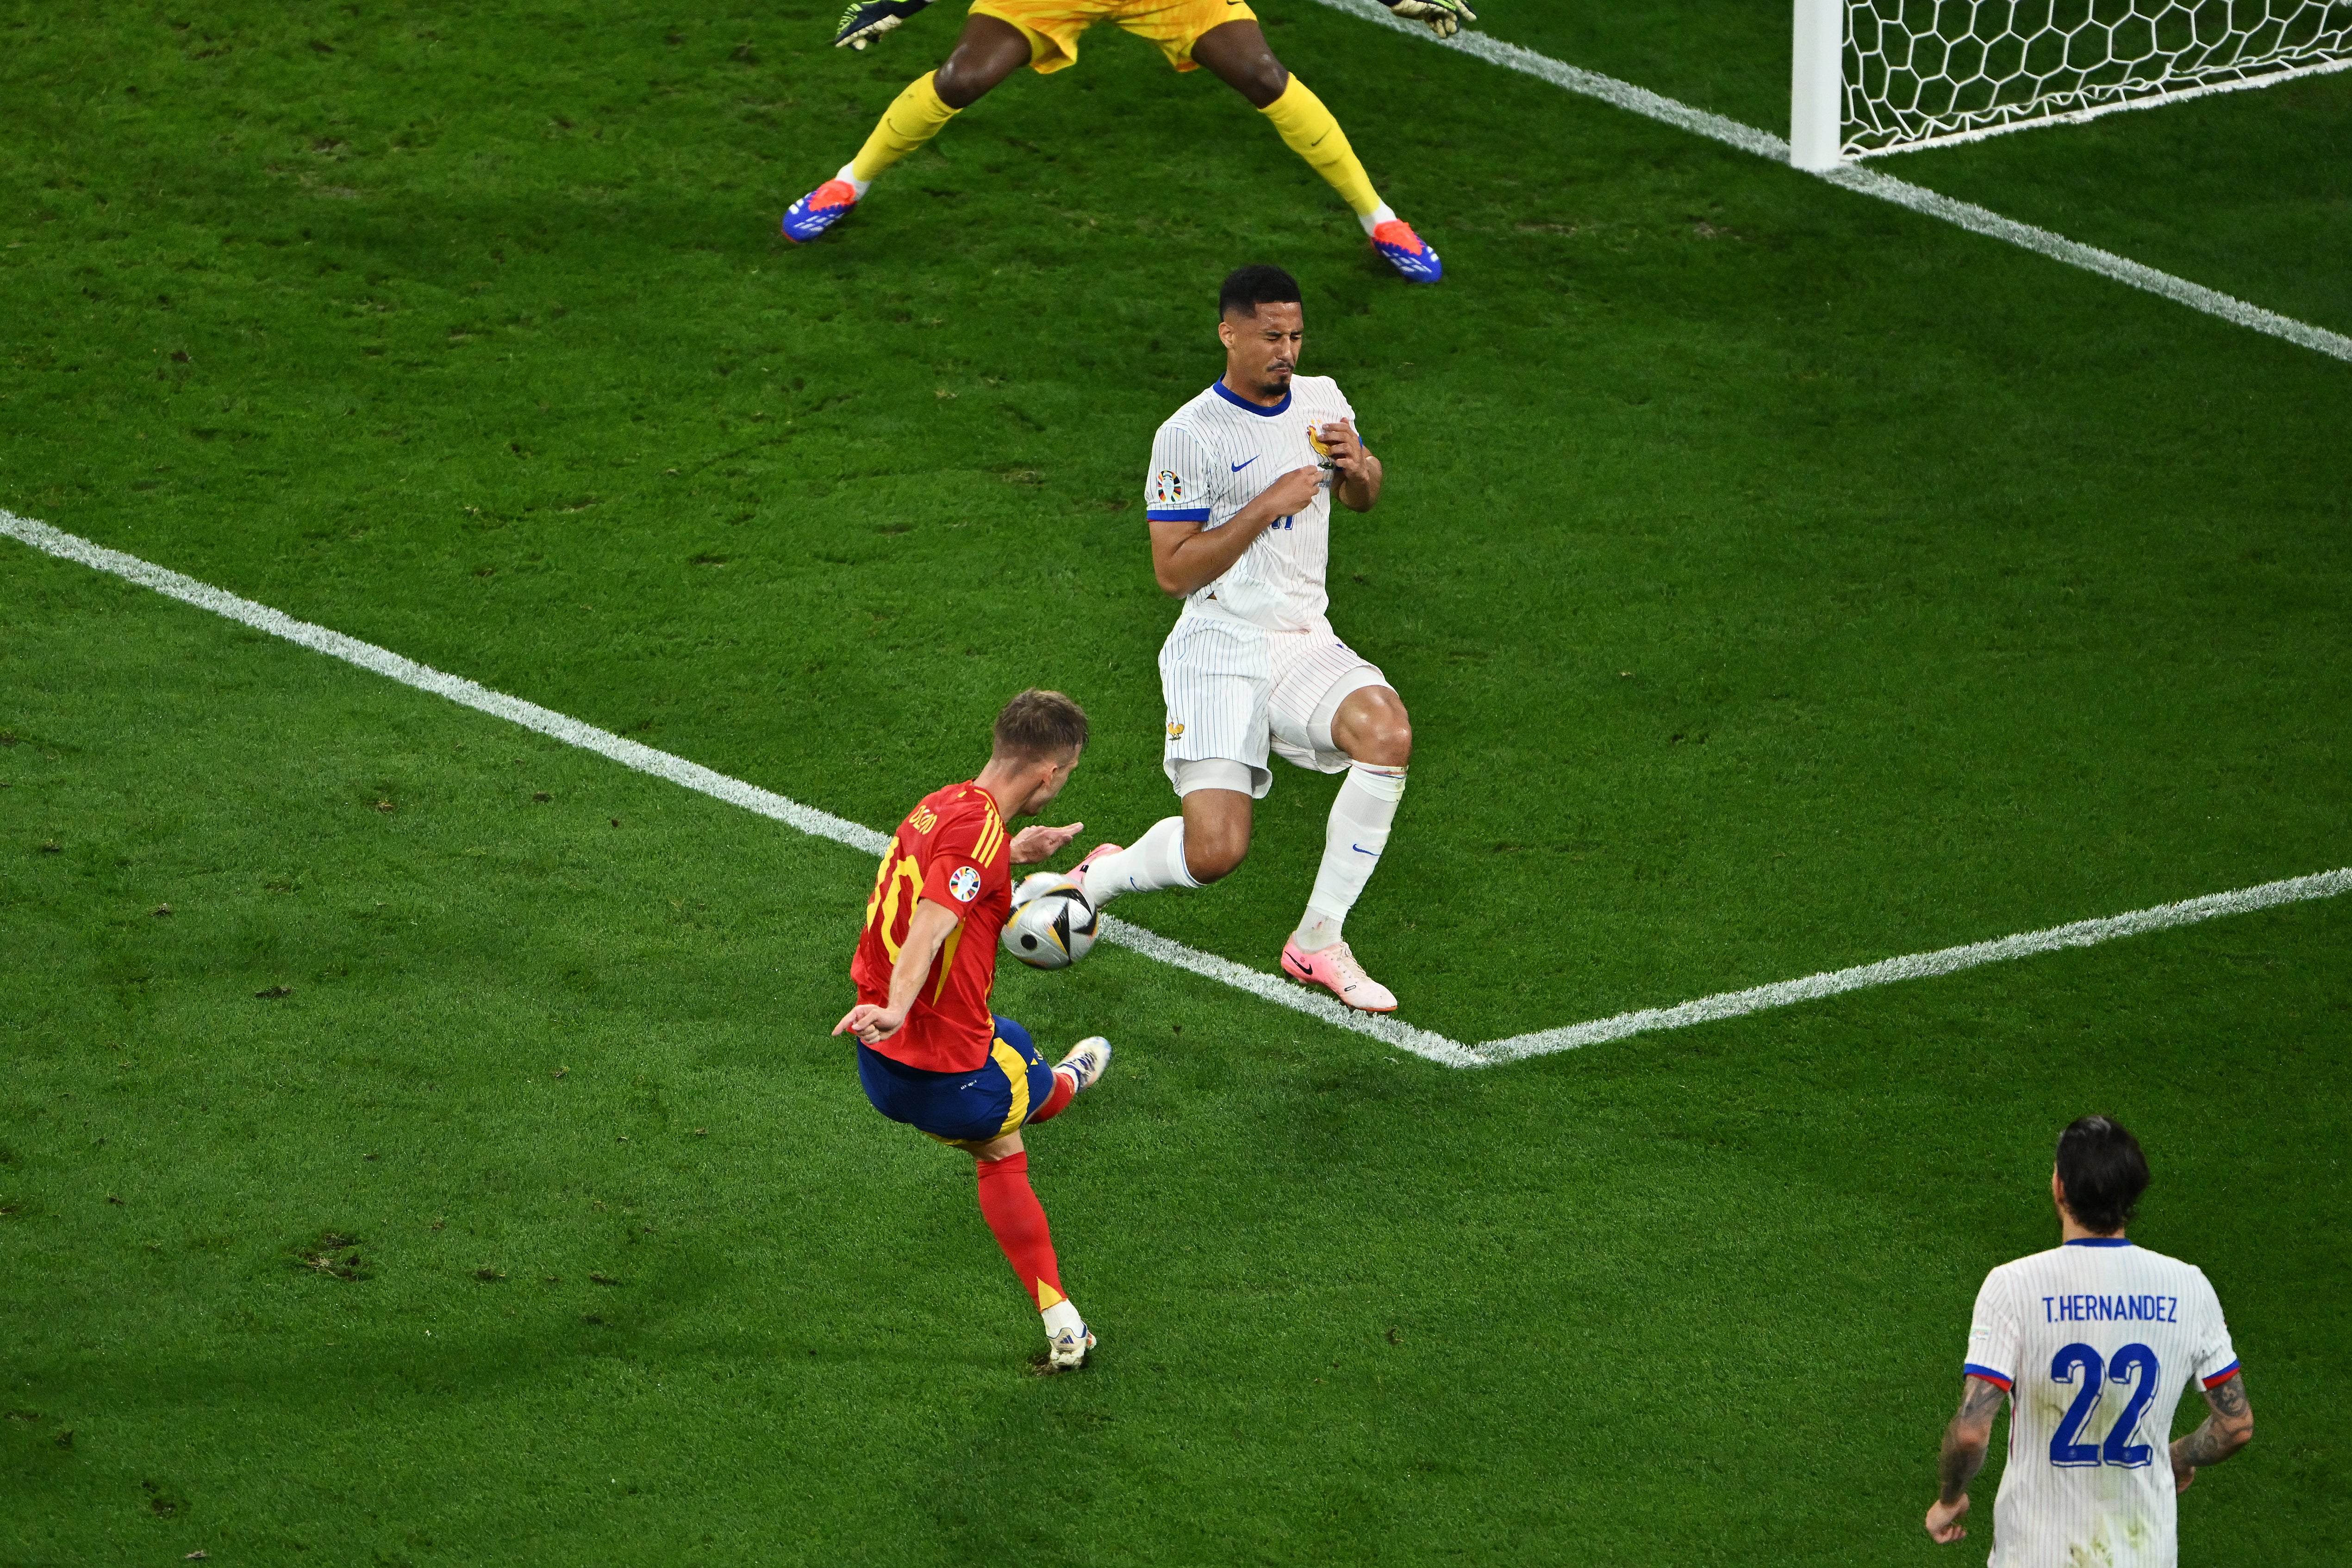 William Saliba is unable to block Olmo’s shot, which deflects in off Jules Kounde as Spain take the lead